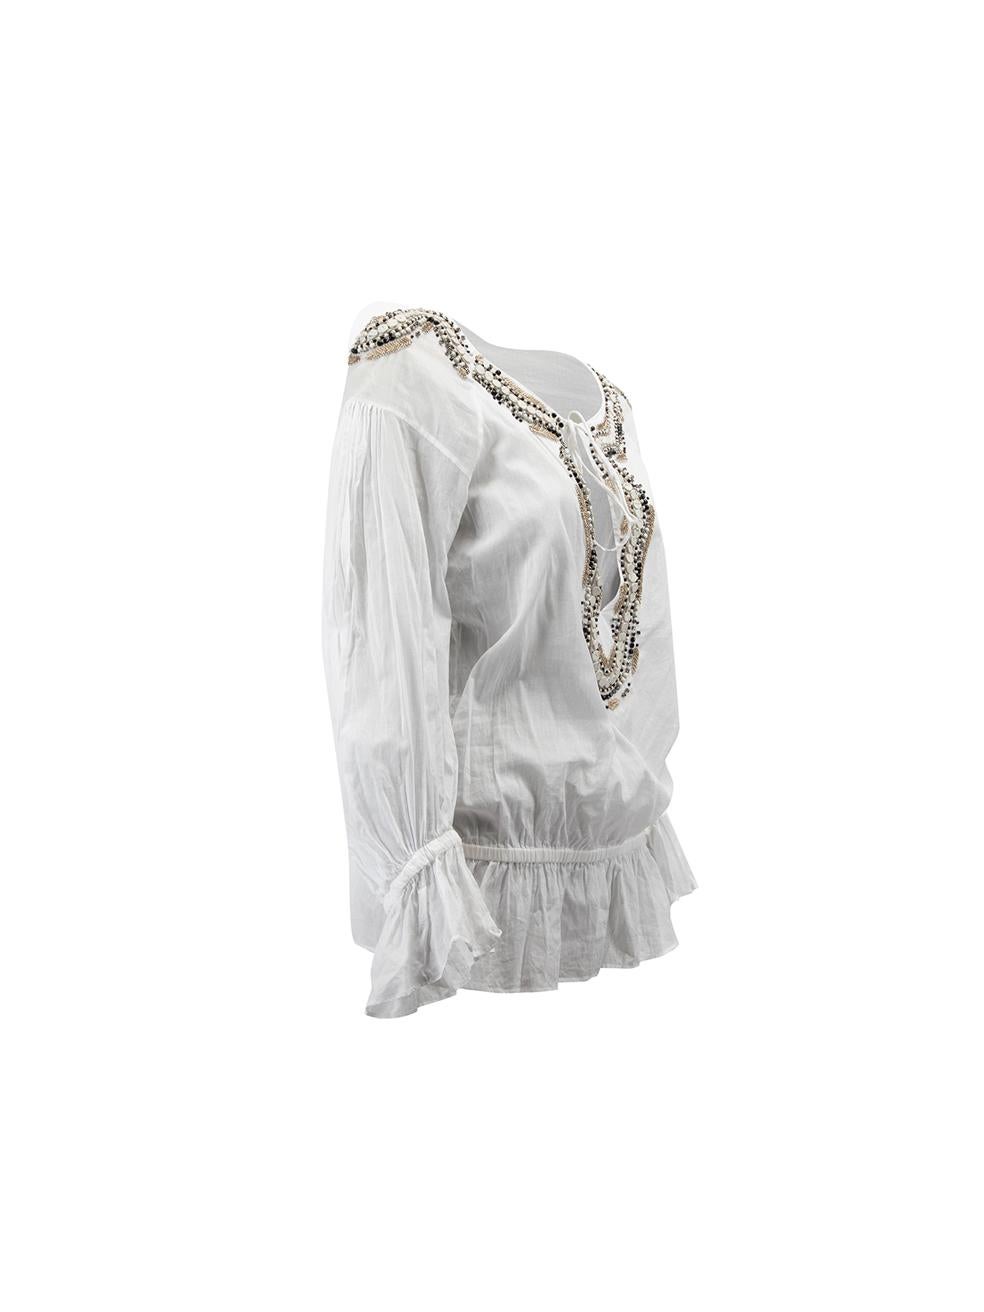 CONDITION is Very good. Minimal wear to top is evident. Minimal loose threads around the beading and wear to the back of the neckline on this used Roberto Cavalli designer resale item. 



Details


White

Cotton

Long sleeves top

Embellished